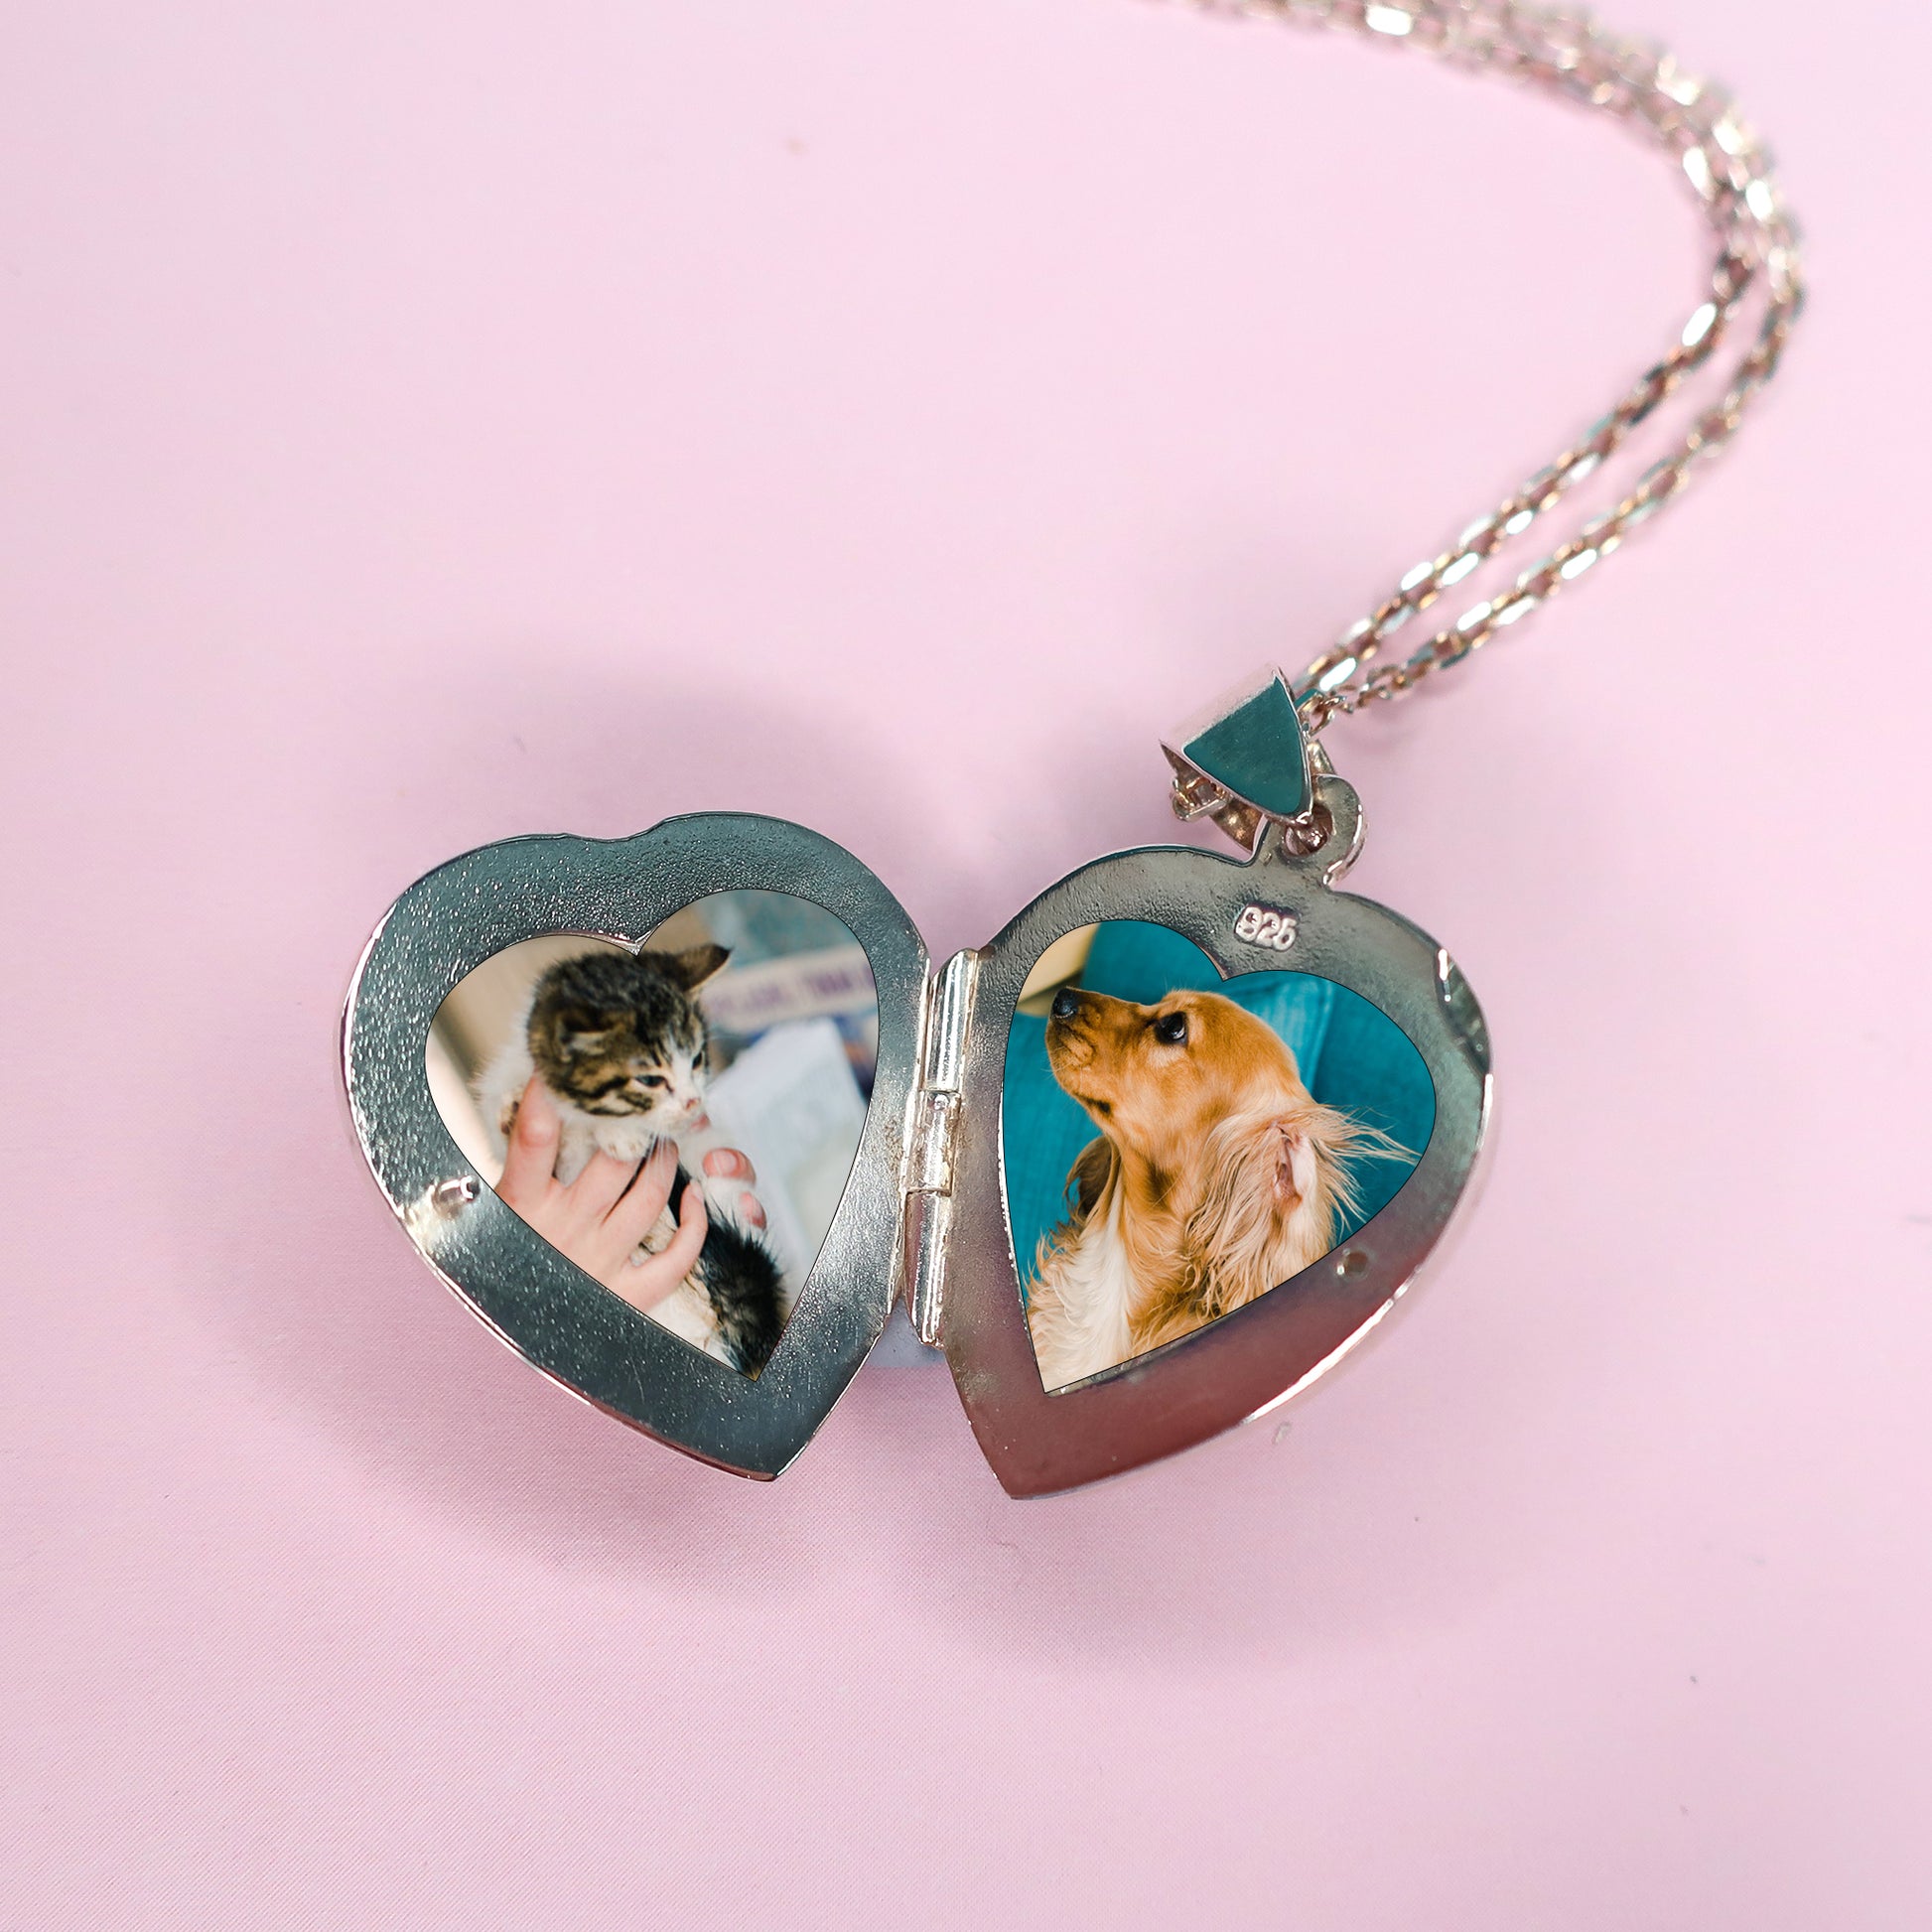 open double locket necklace containing a photo of a cat and a photo of a dog